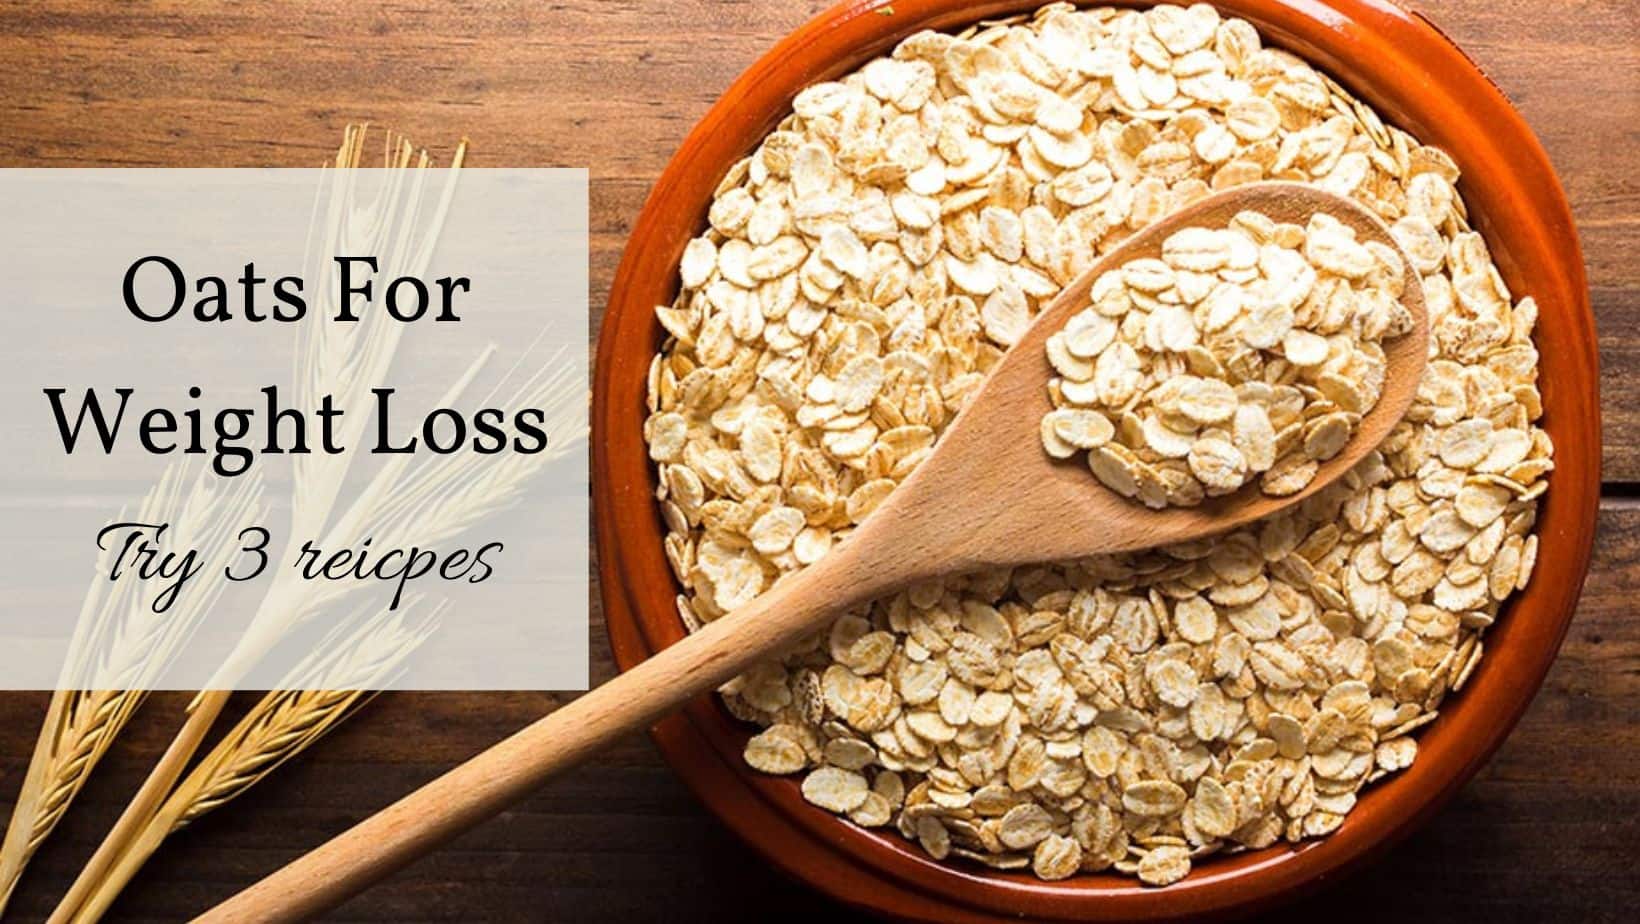 Oats and weight loss